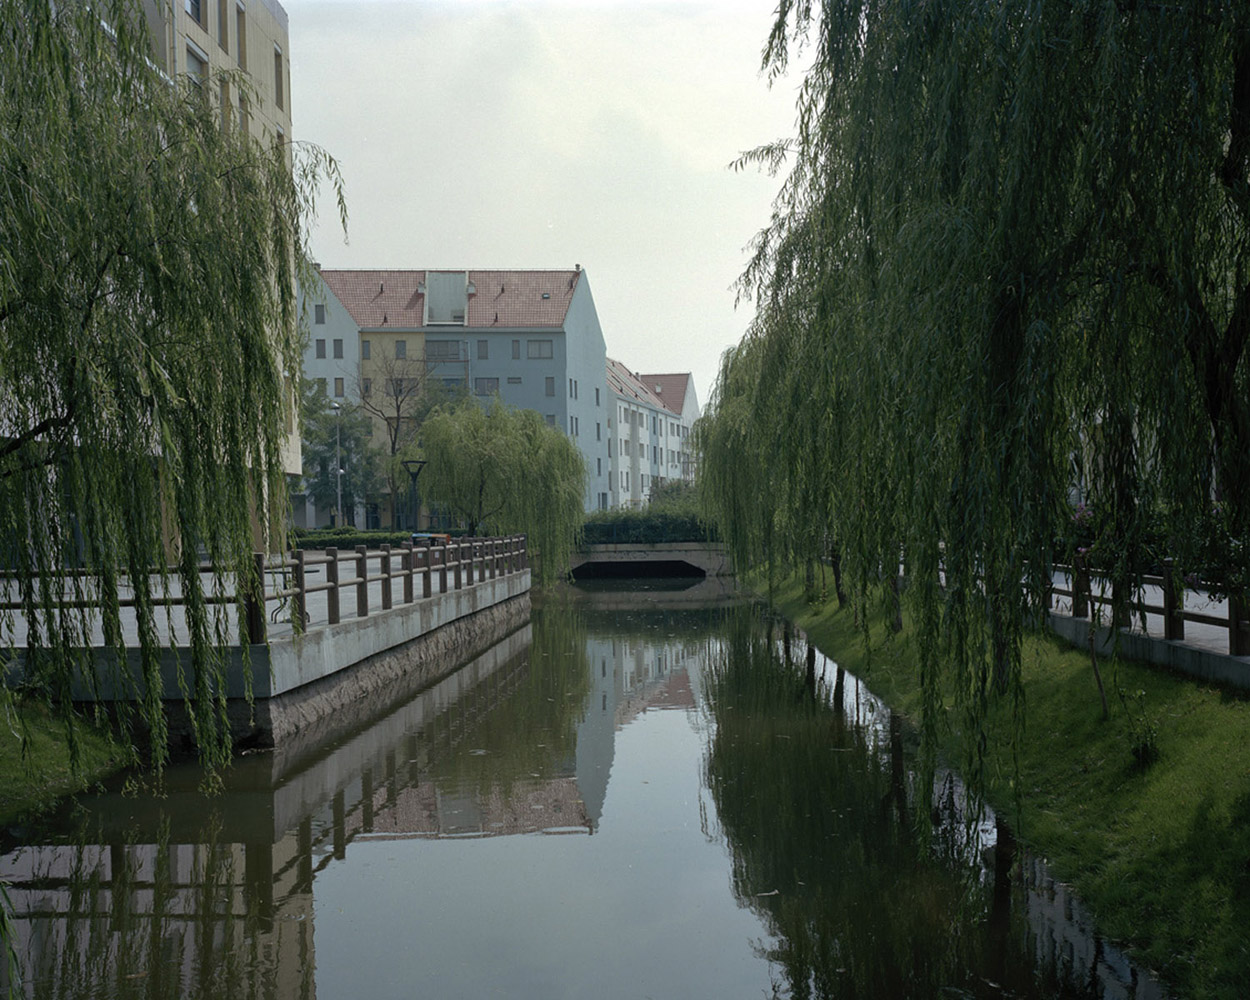 The following images are from the series Replicas by Pablo Conejo, which the photographer began in 2010.Germany